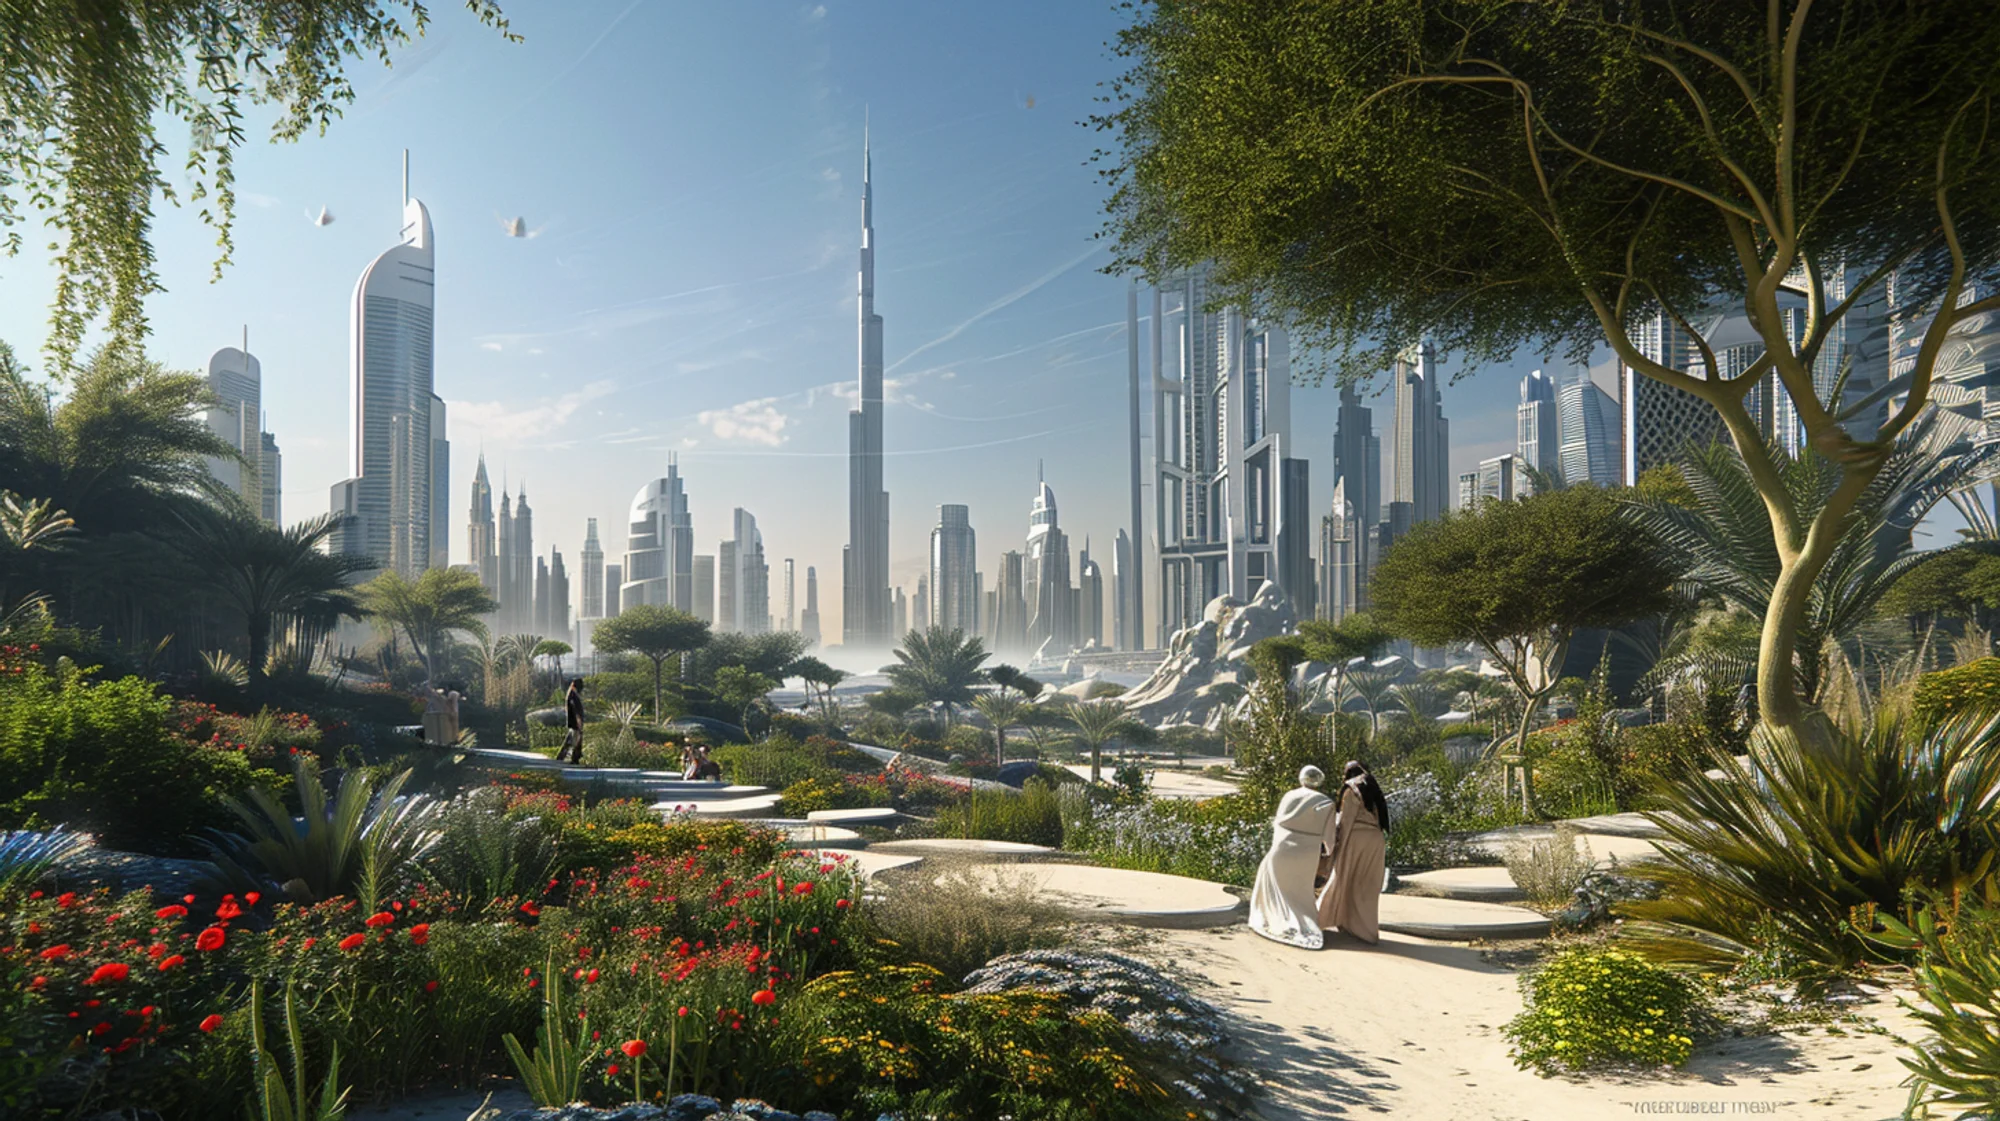 People strolling in a beautiful garden with a metropolis in the background